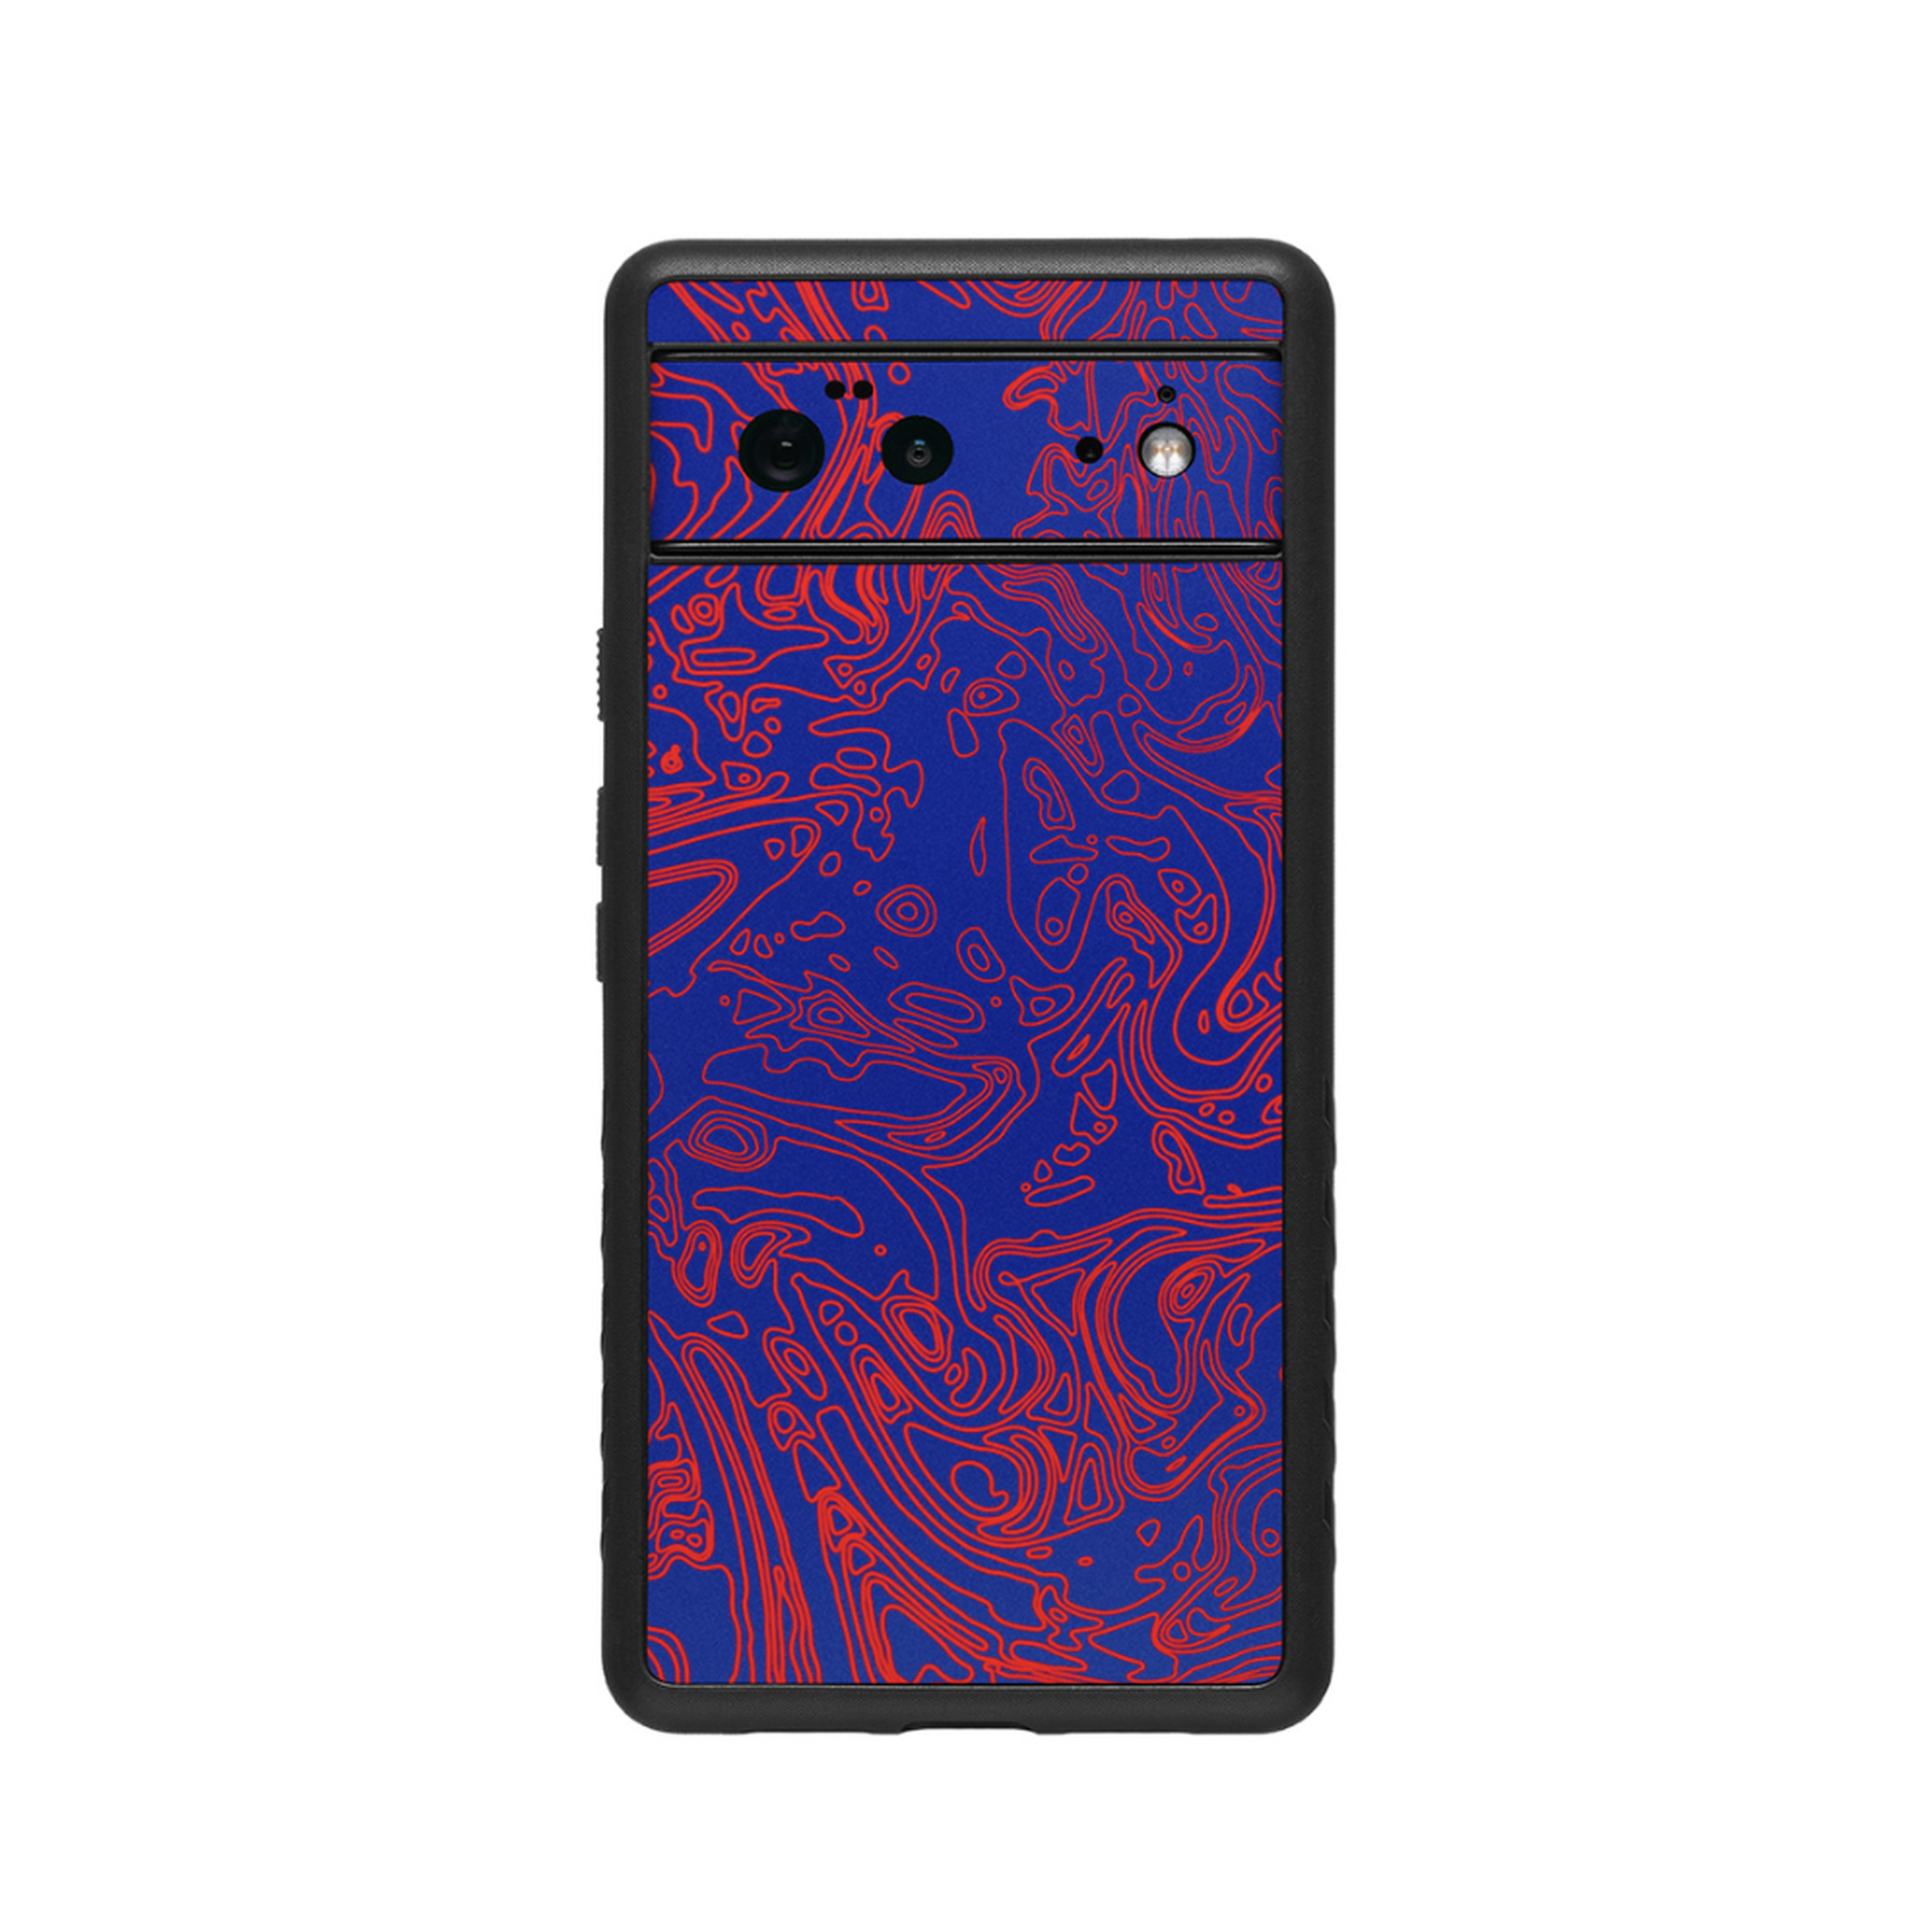 Back of Pixel 6 with blue background and purple squiggly lines.